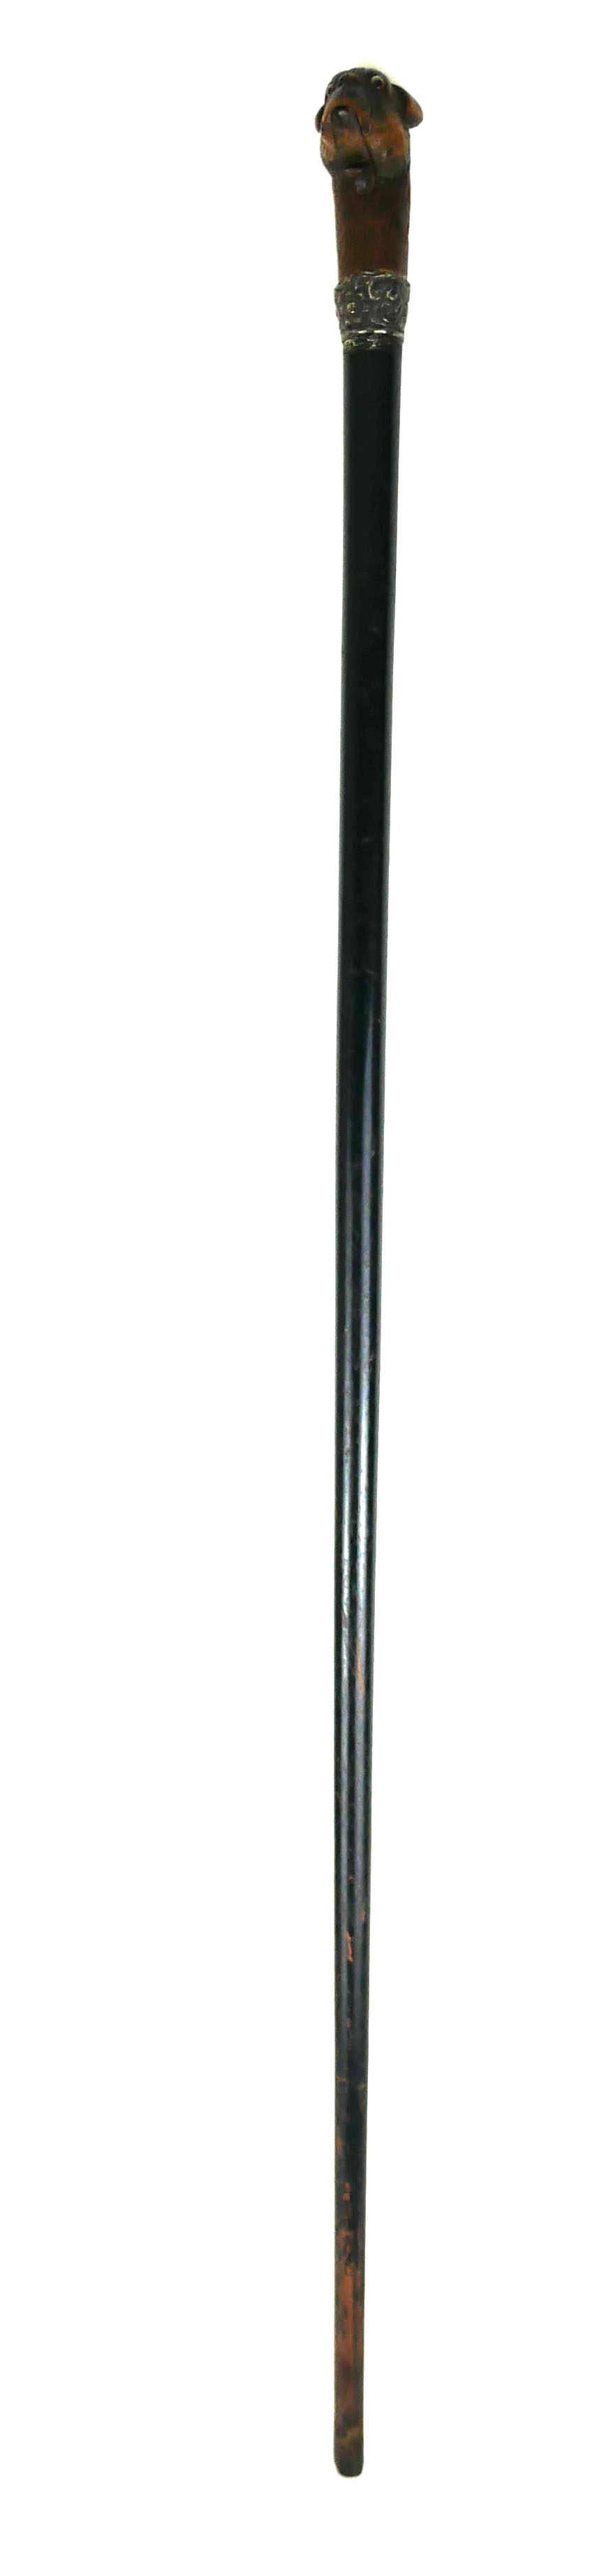 AN EDWARDIAN WALKING STICK With carved handle in the form of pug with articulated mouth and glass - Image 2 of 4